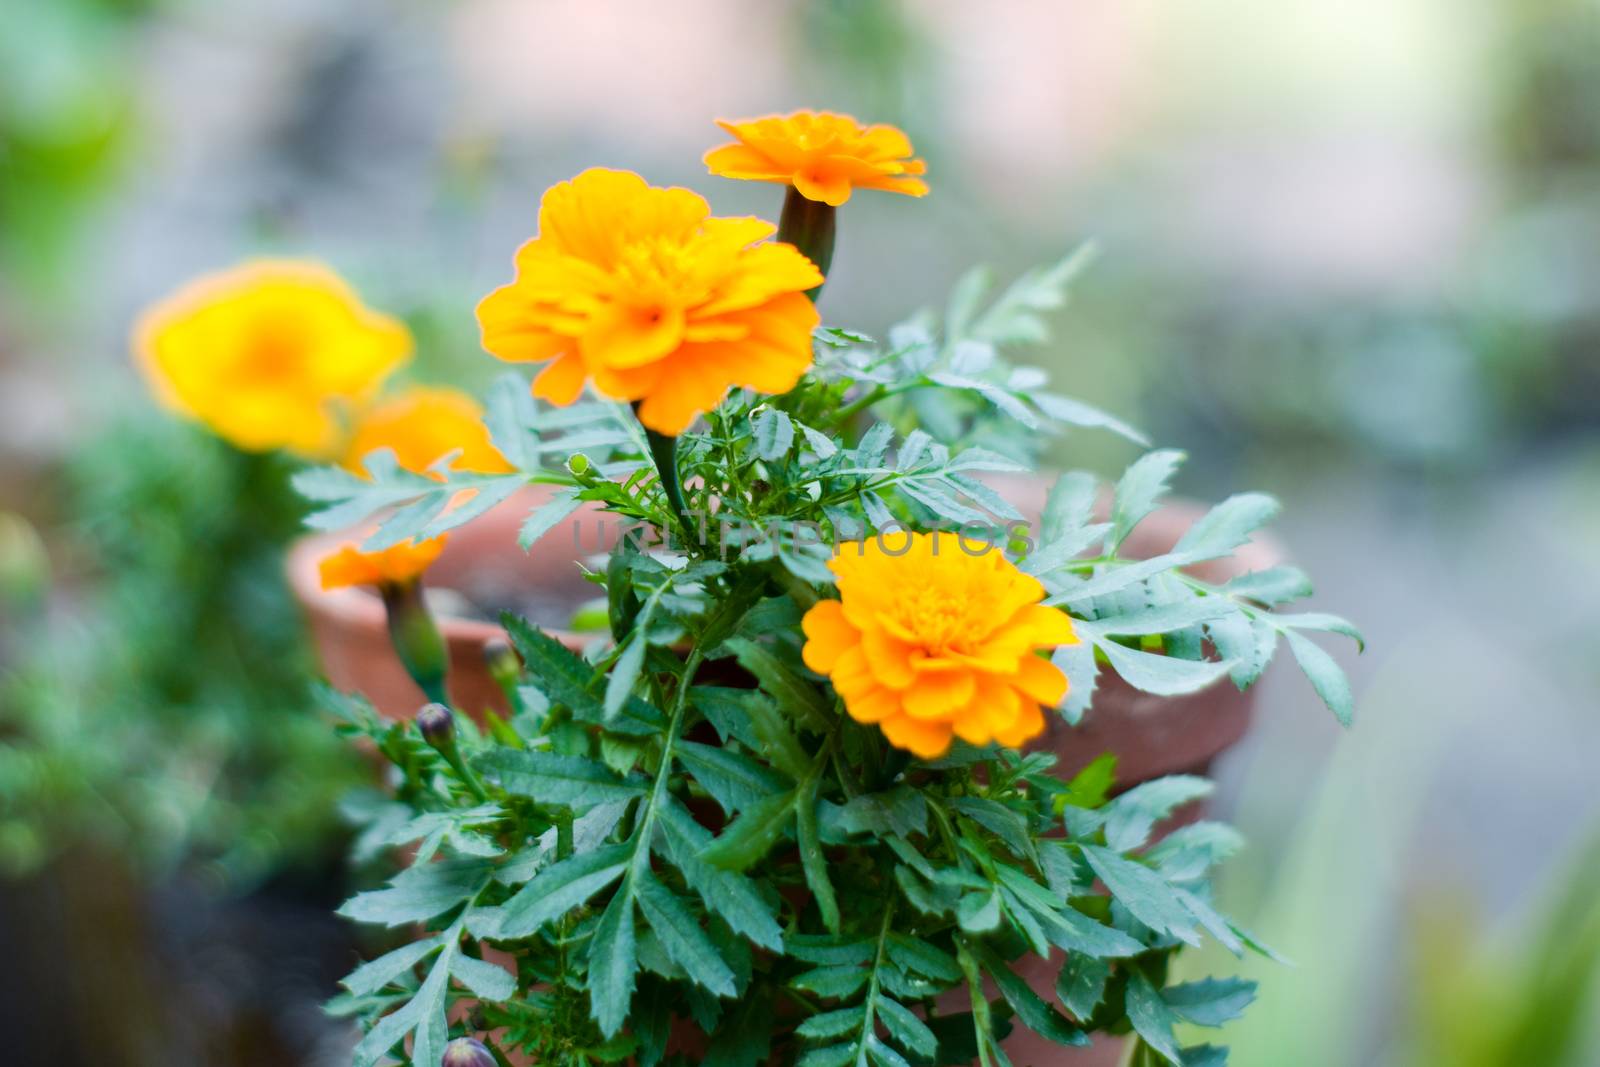 Yellow marigold flowers in sunlight. A Tagetes genus or perennial, mostly herbaceous plants in the sunflower family. Blooms naturally in golden, orange, yellow, white colors, with maroon highlights. by sudiptabhowmick